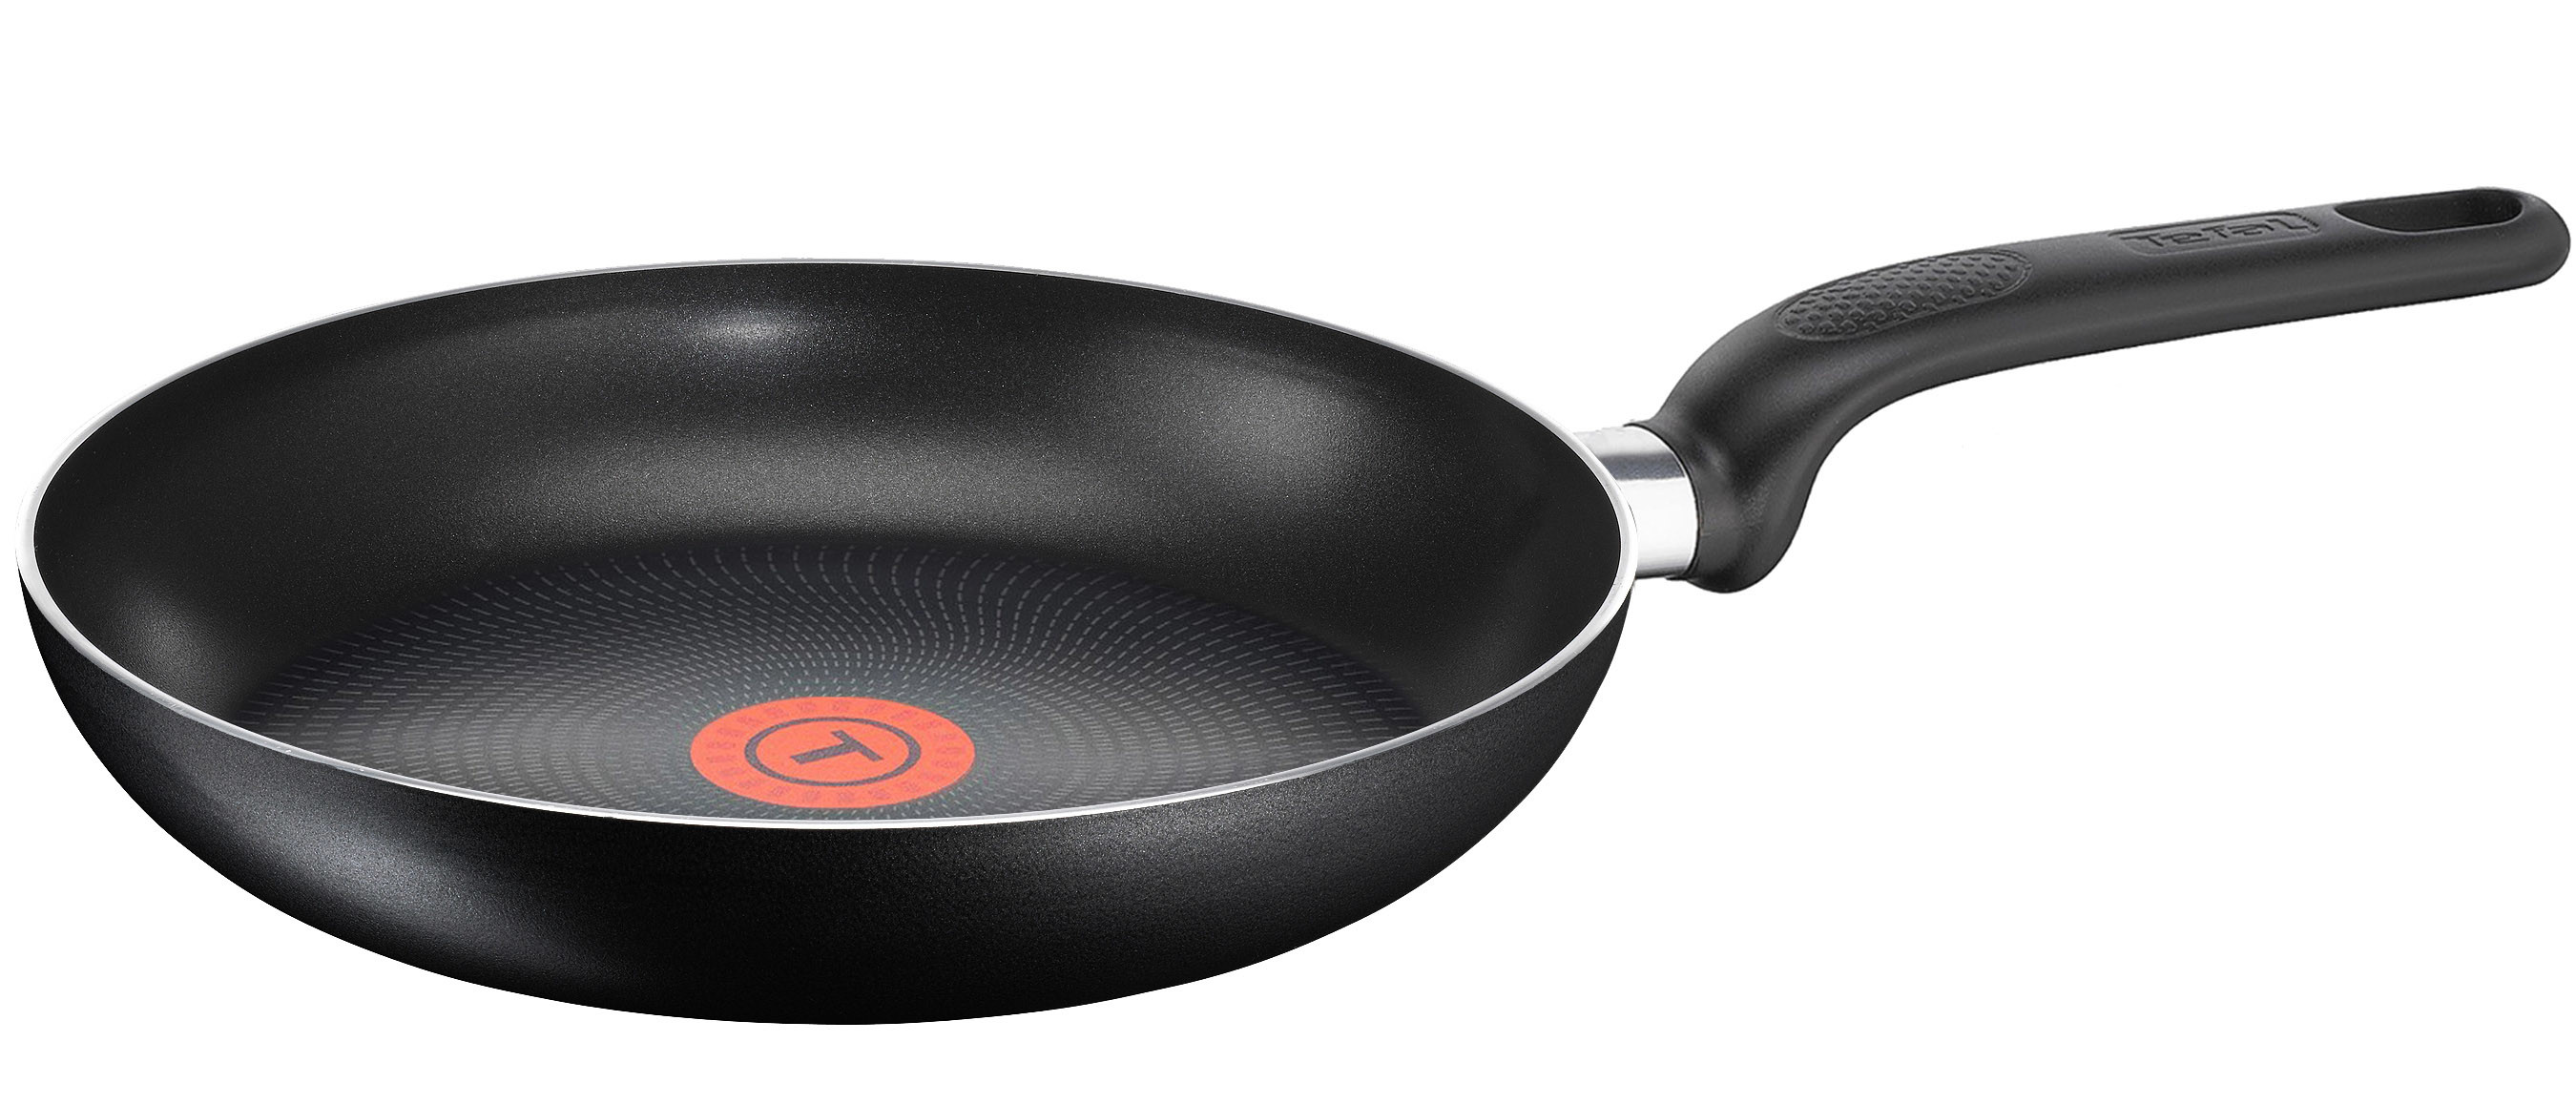 Tefal Paella Only Cook 20cm